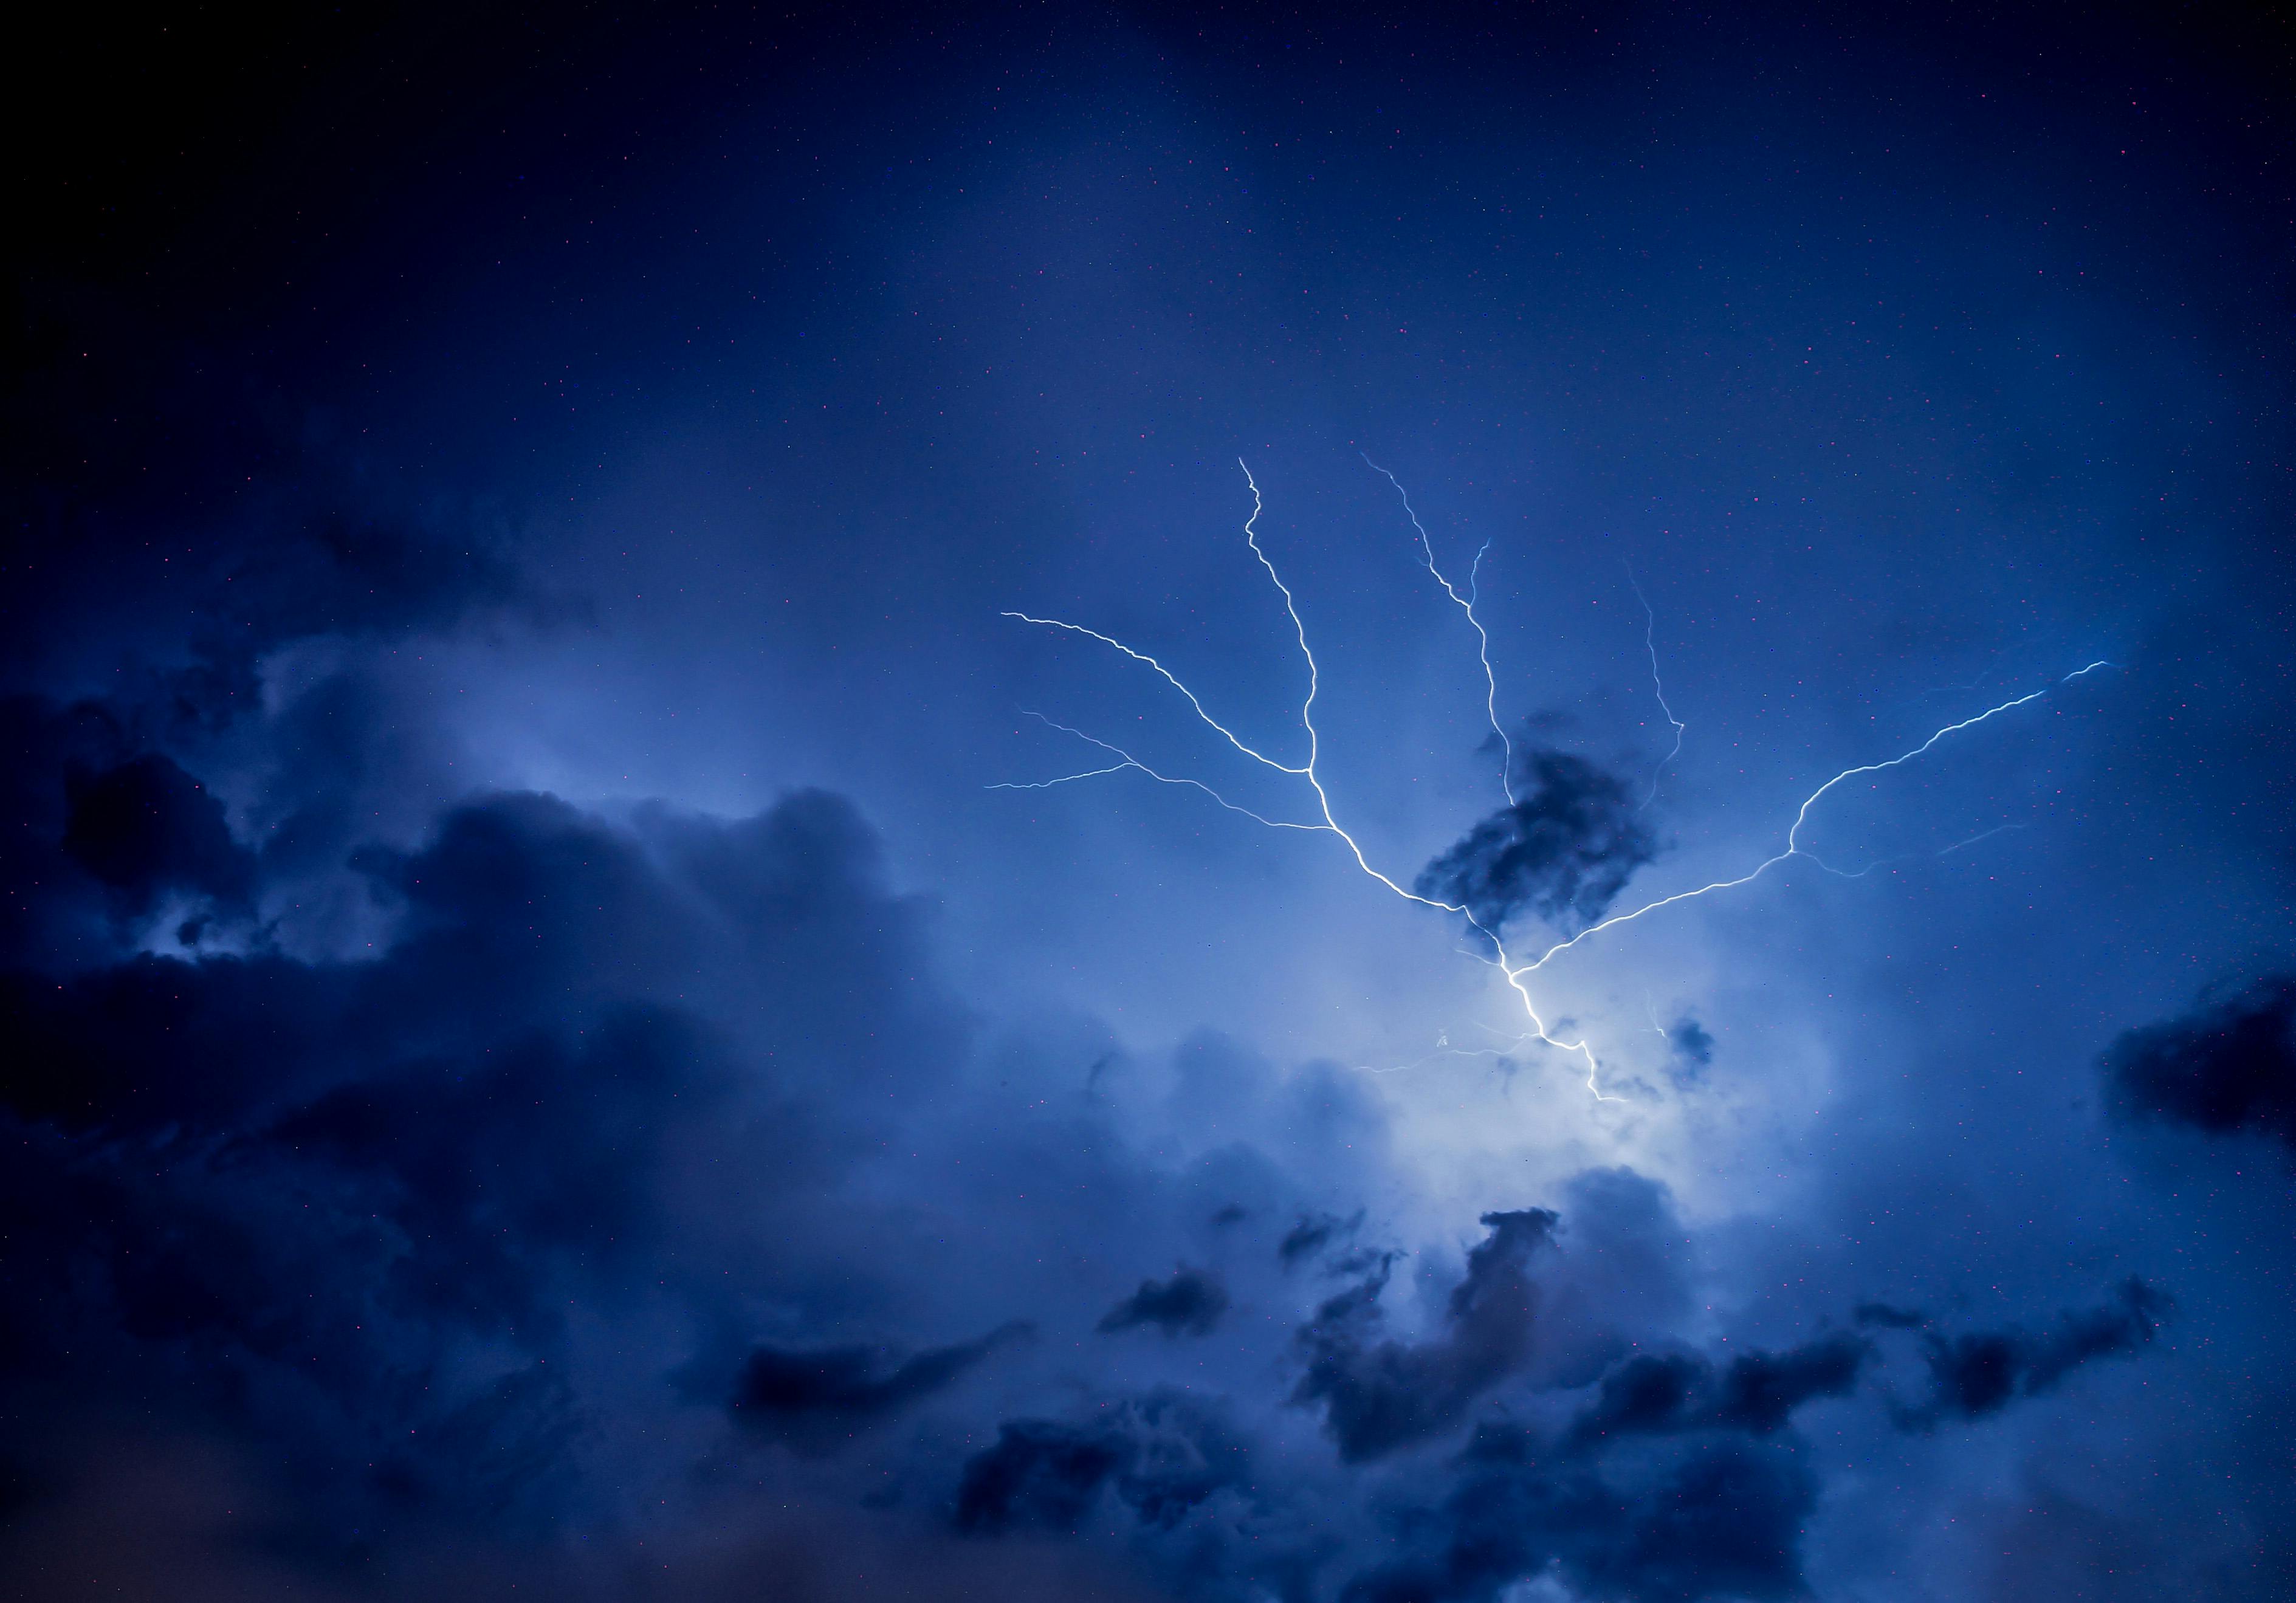 Thunderstorm Live Wallpaper  Apps on Google Play